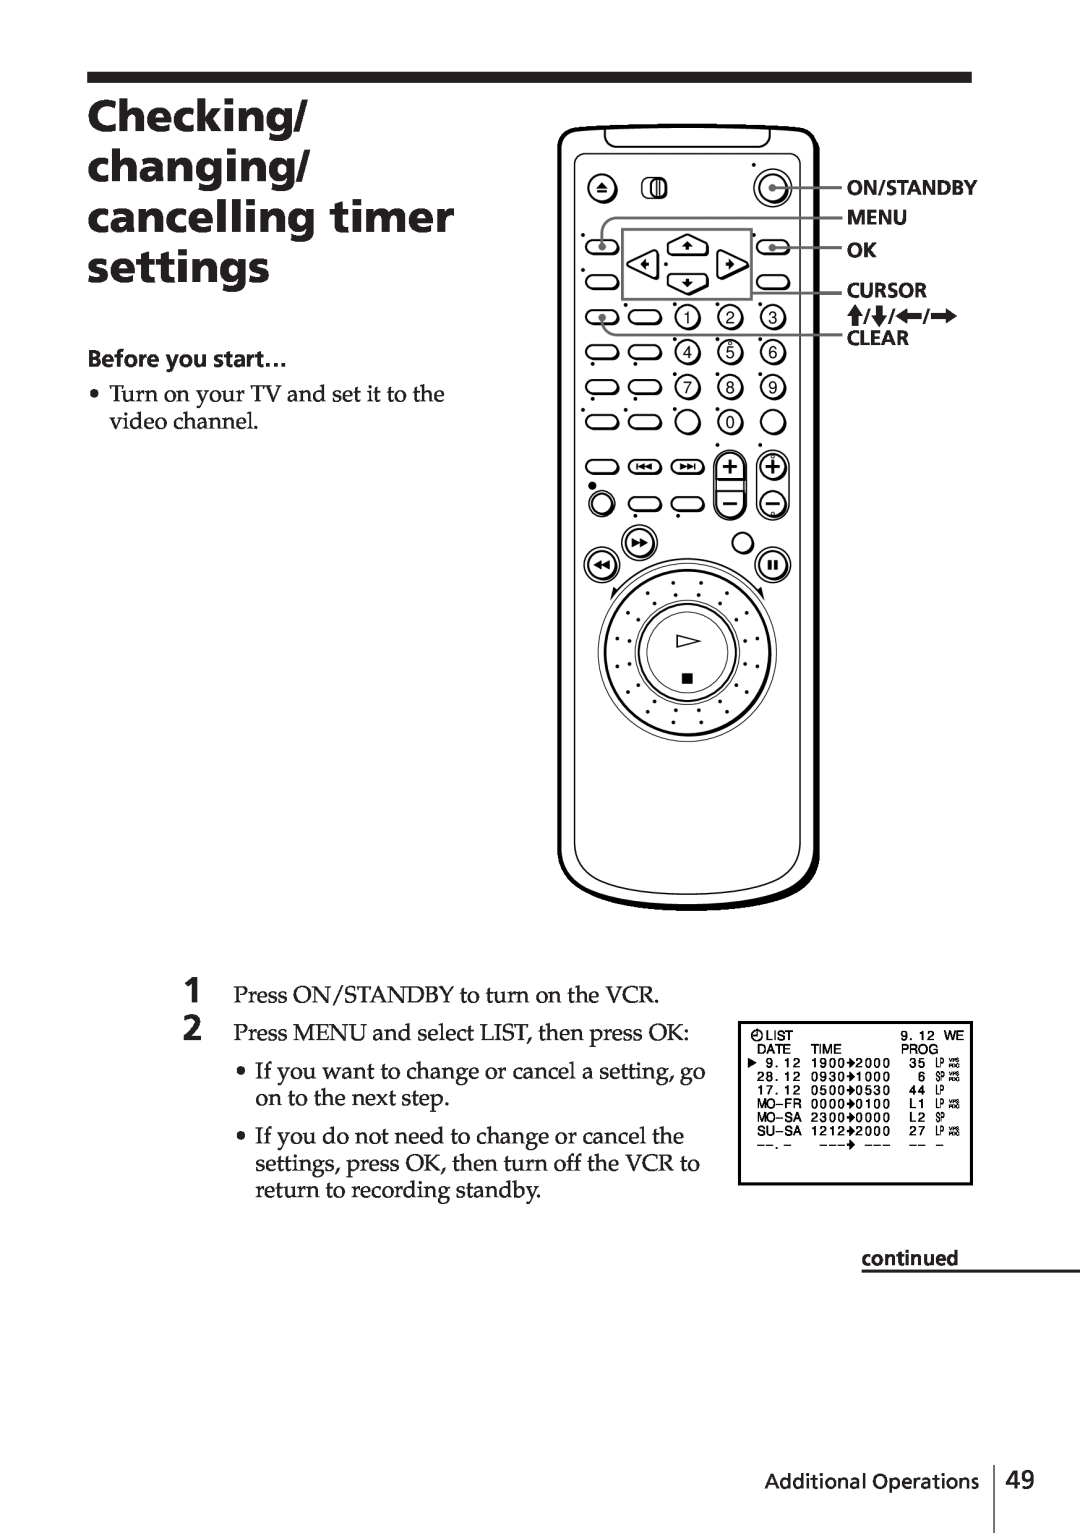 Sony SLV-E580EG manual Checking changing/ cancelling timer settings, Before you start… 